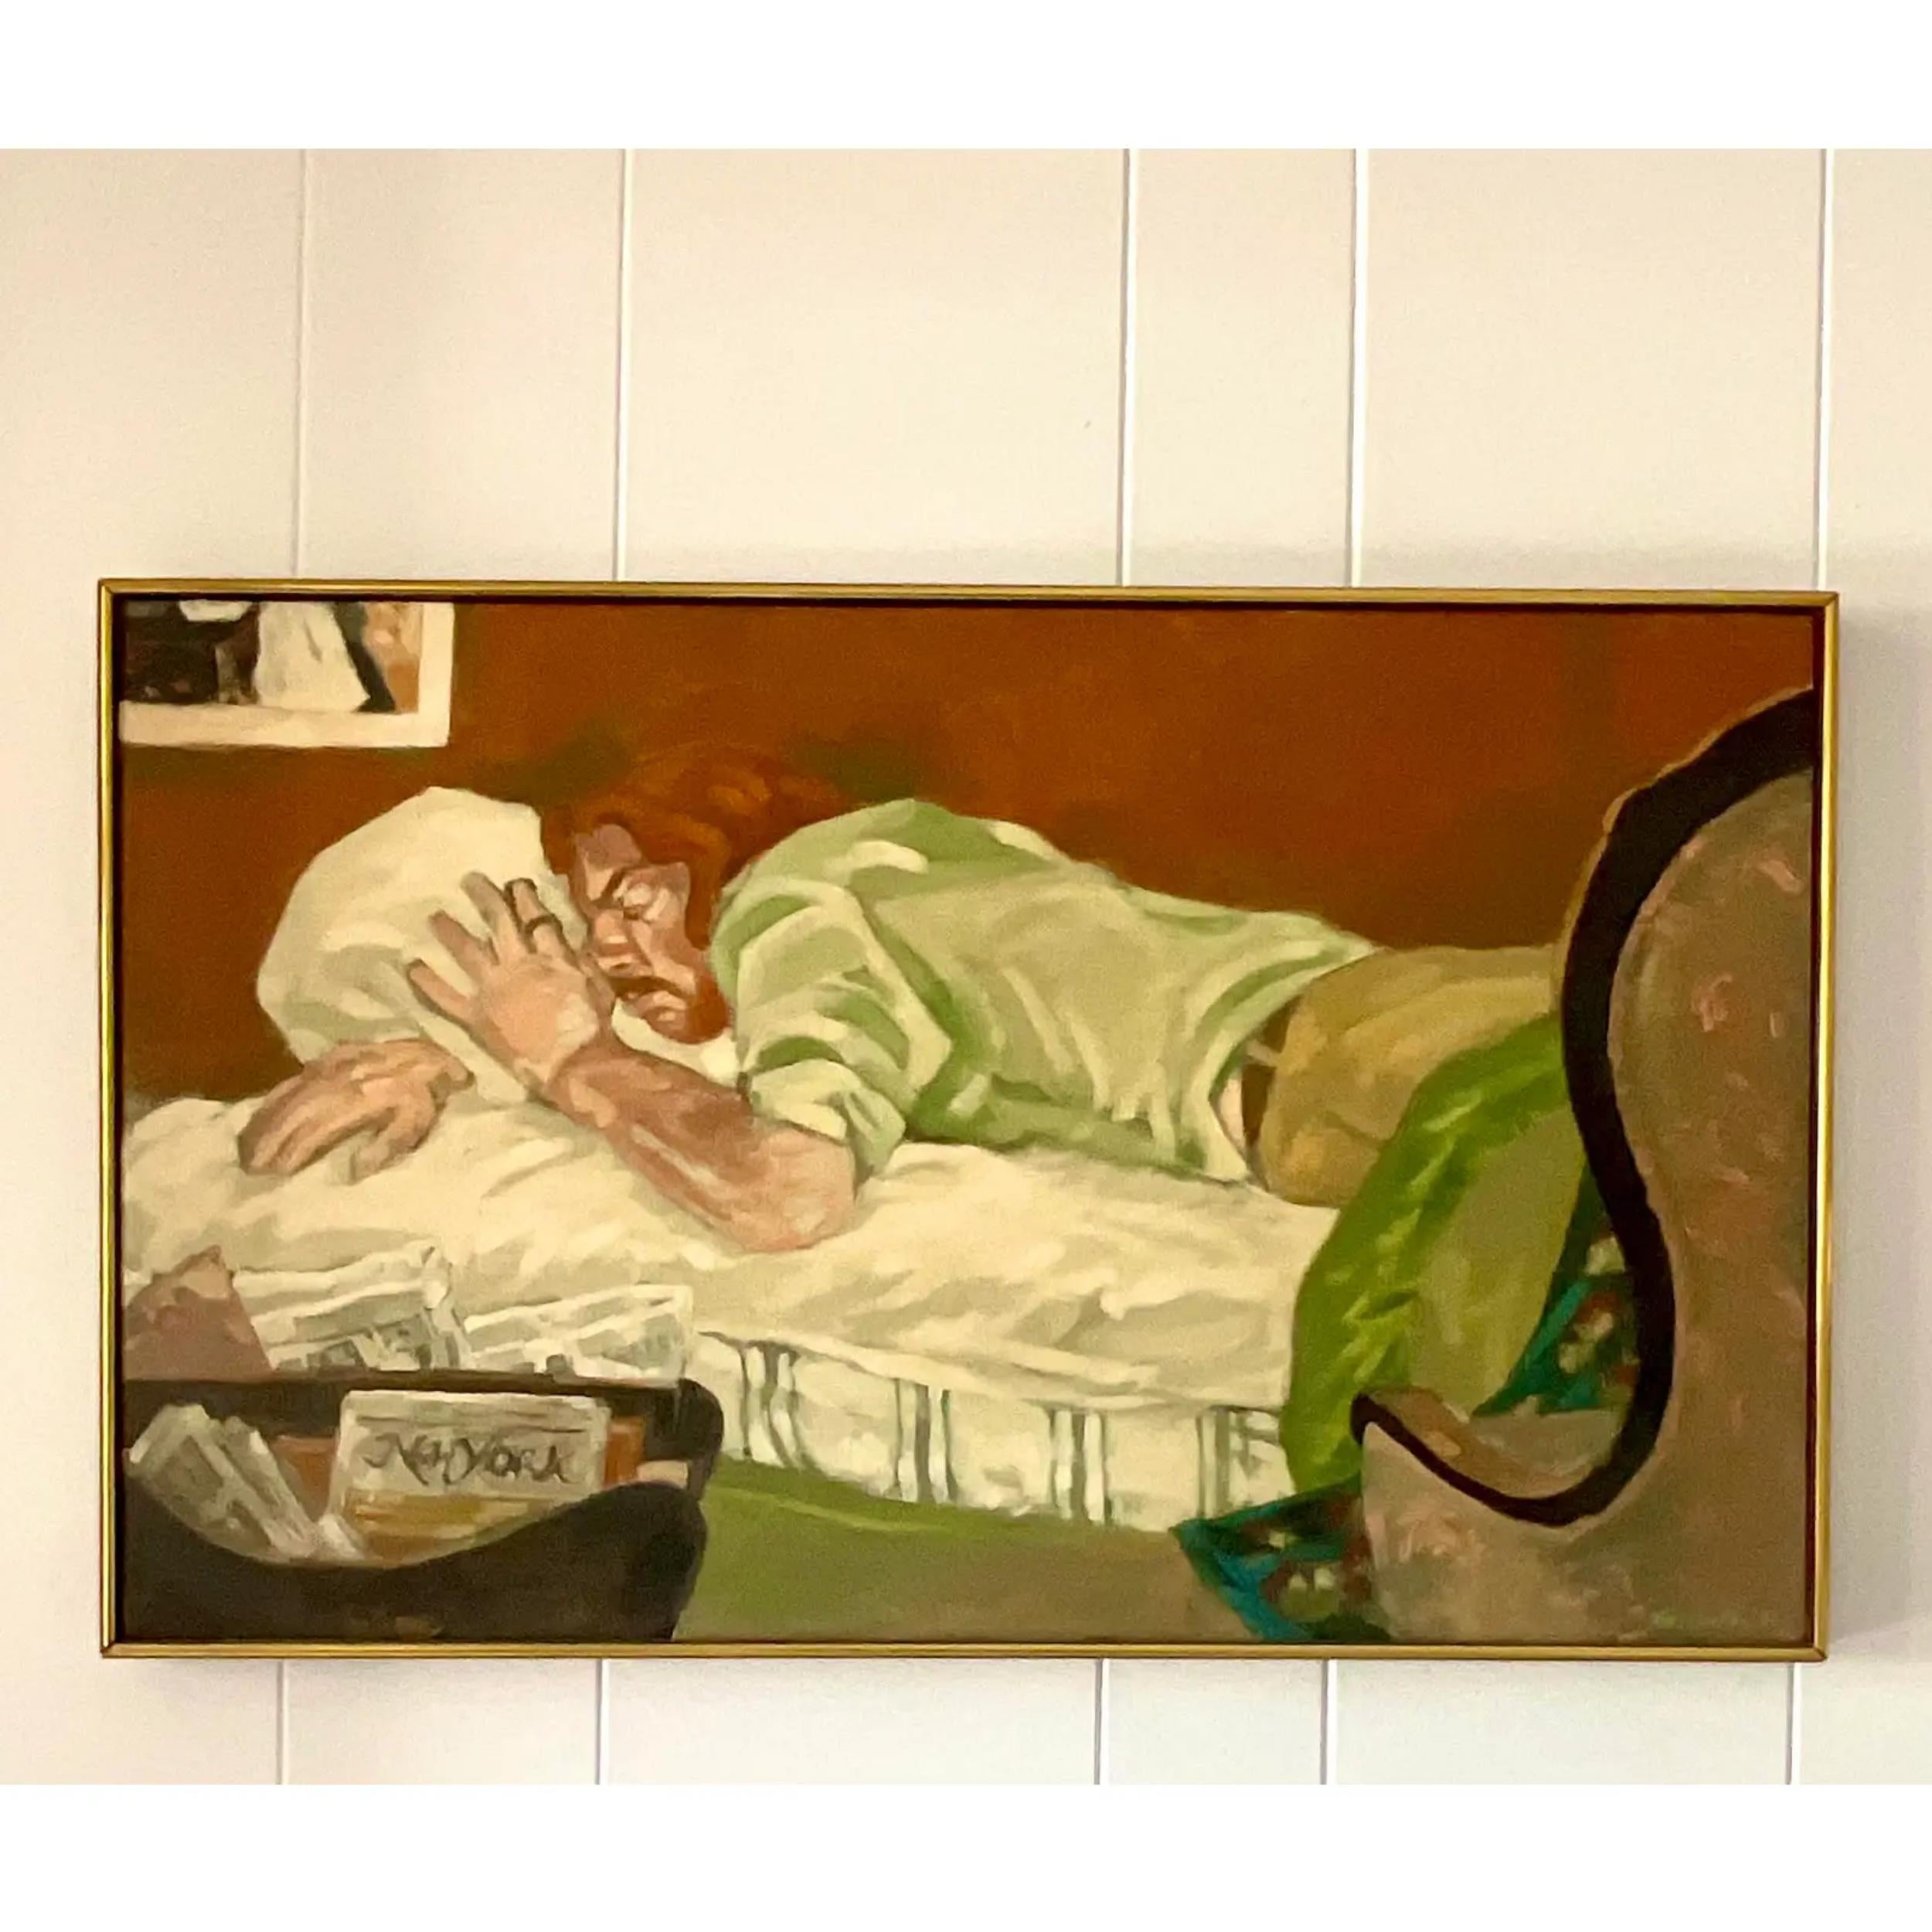 A fantastic vintage MCM original oil painting on canvas. A chic Figural composition of a man at rest. Signed by the artist. Acquired from a NY estate